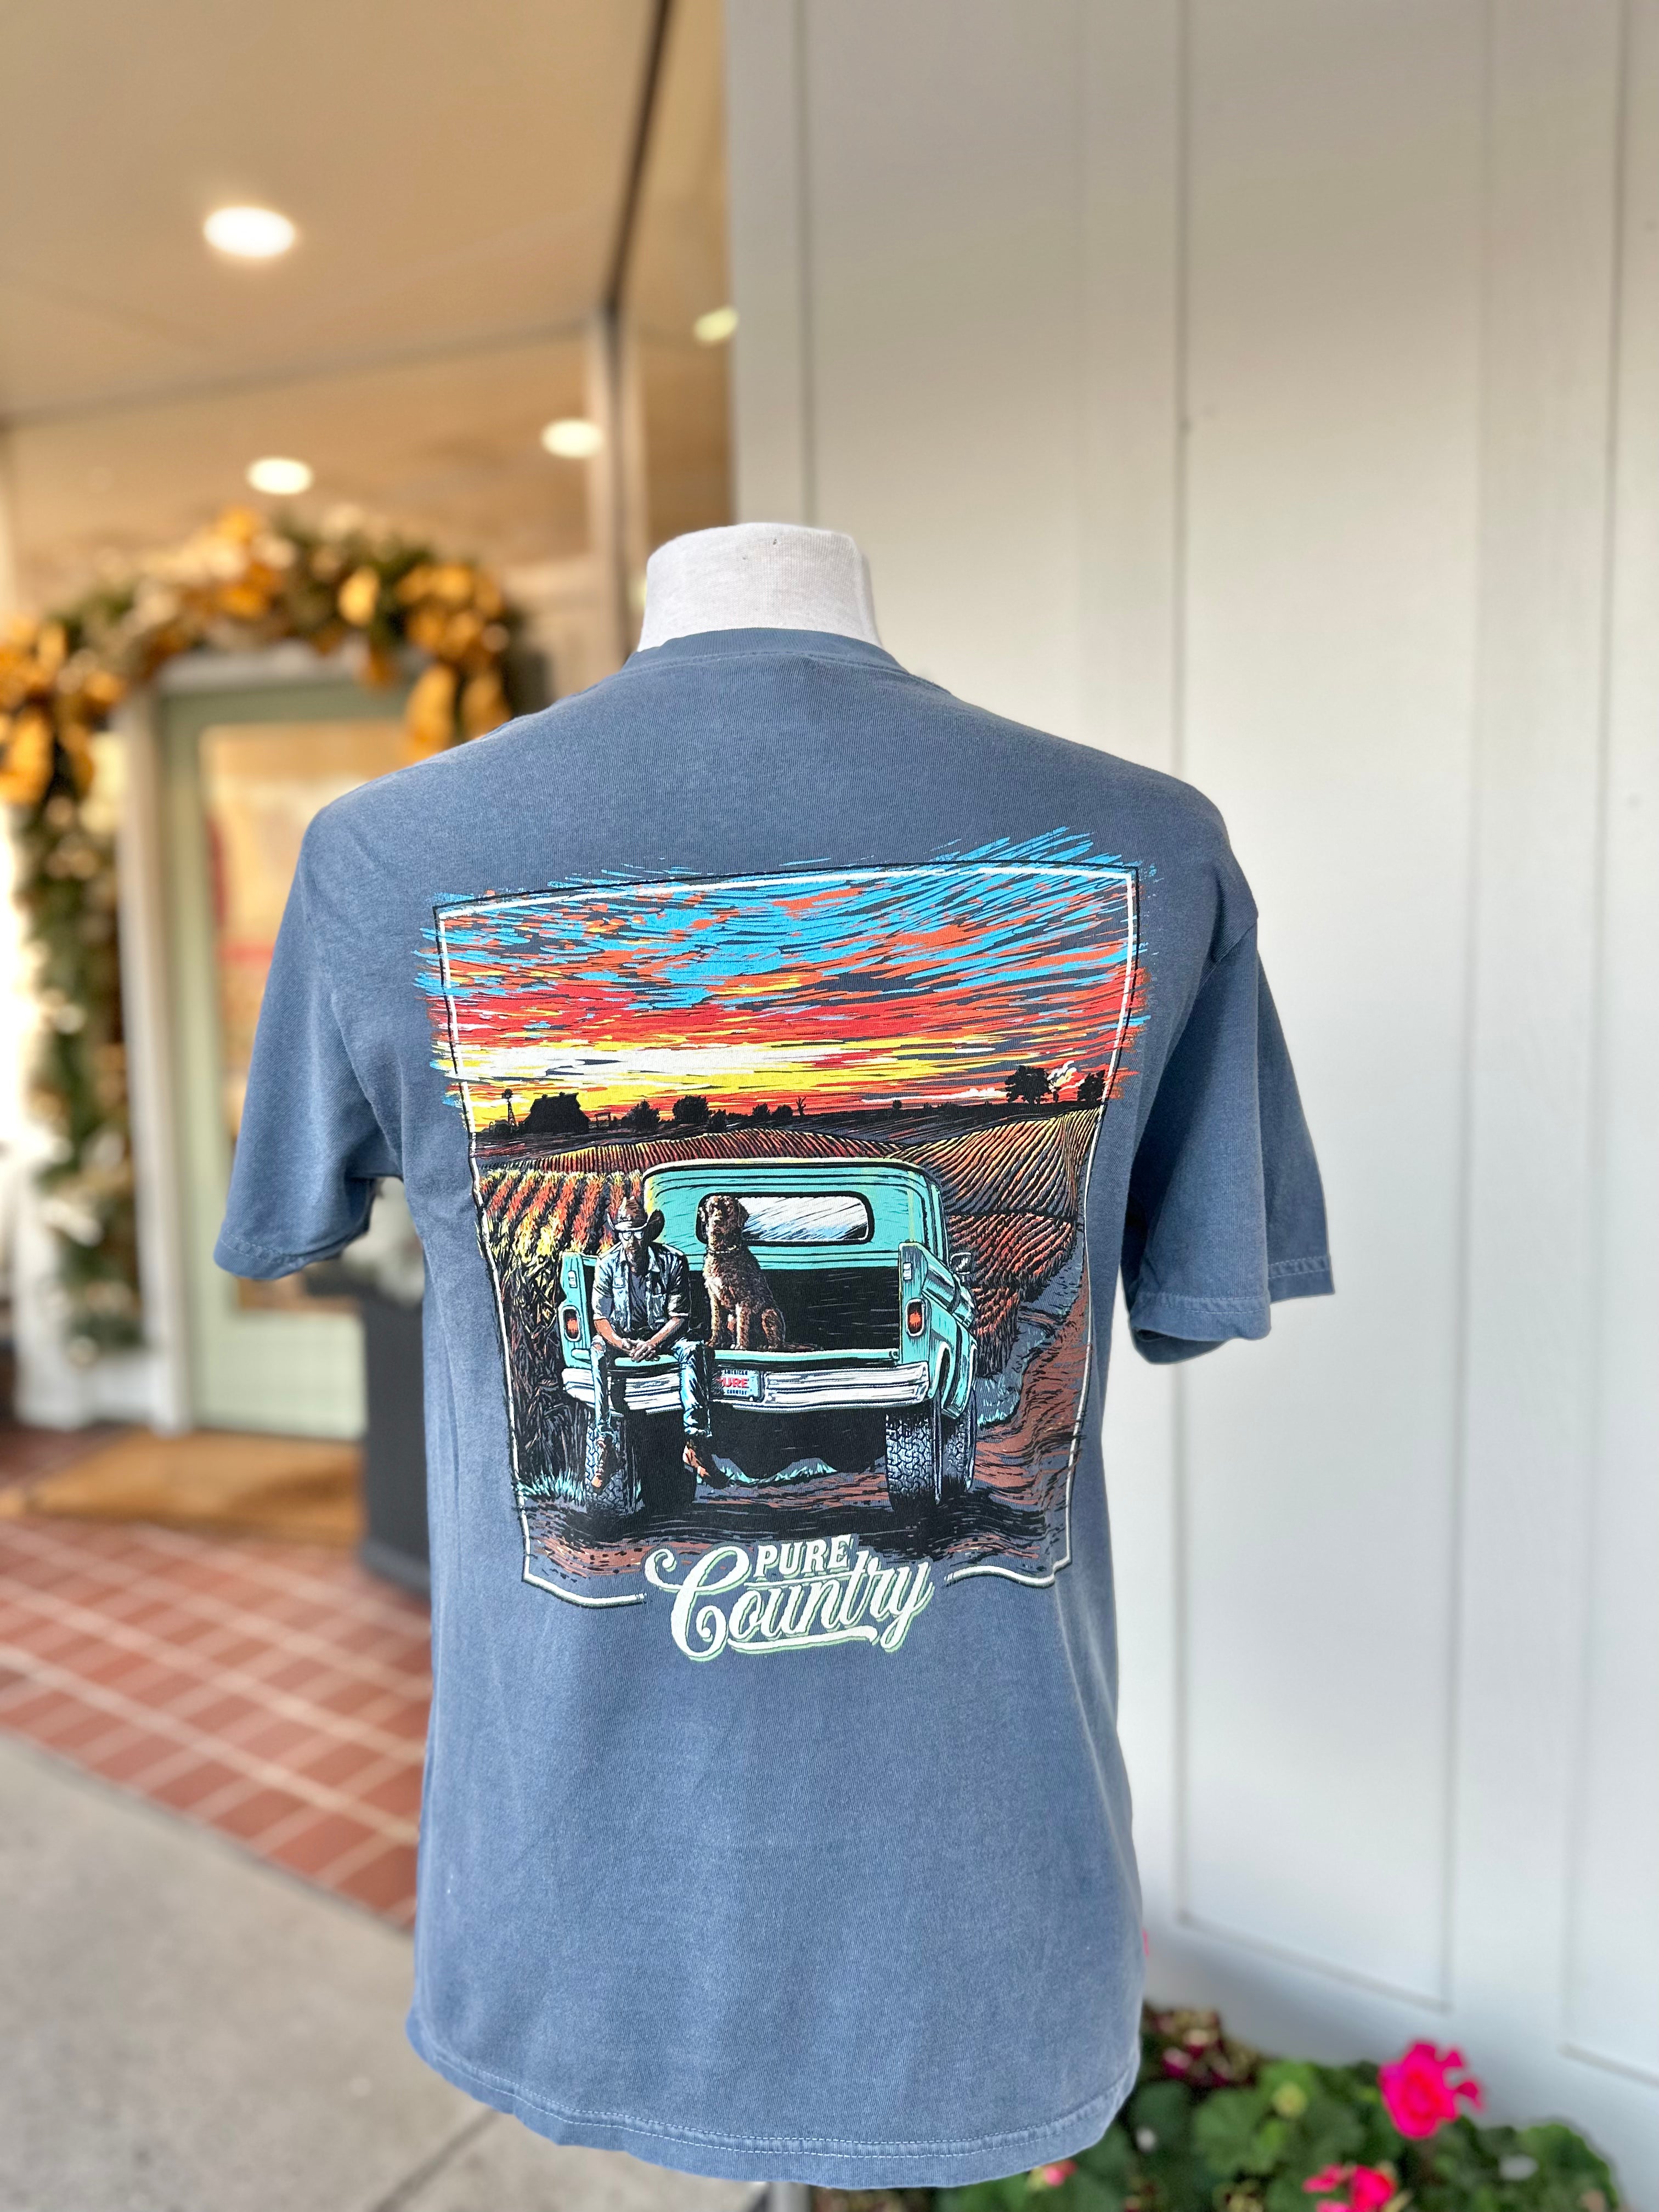 Country Roads Tee by Pure Country